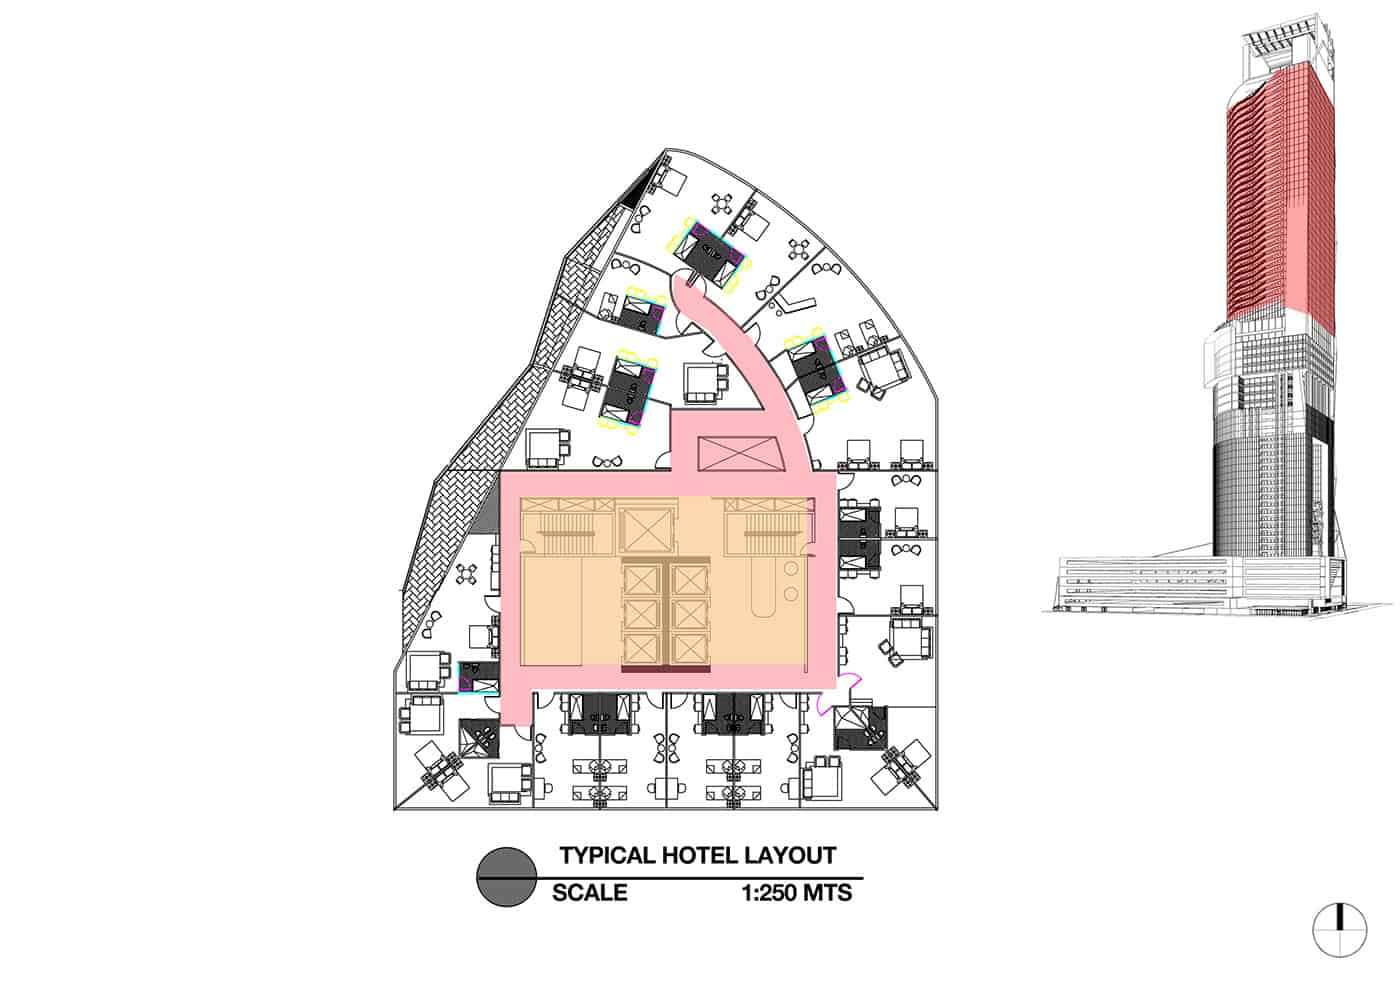 Typical Hotel Layout